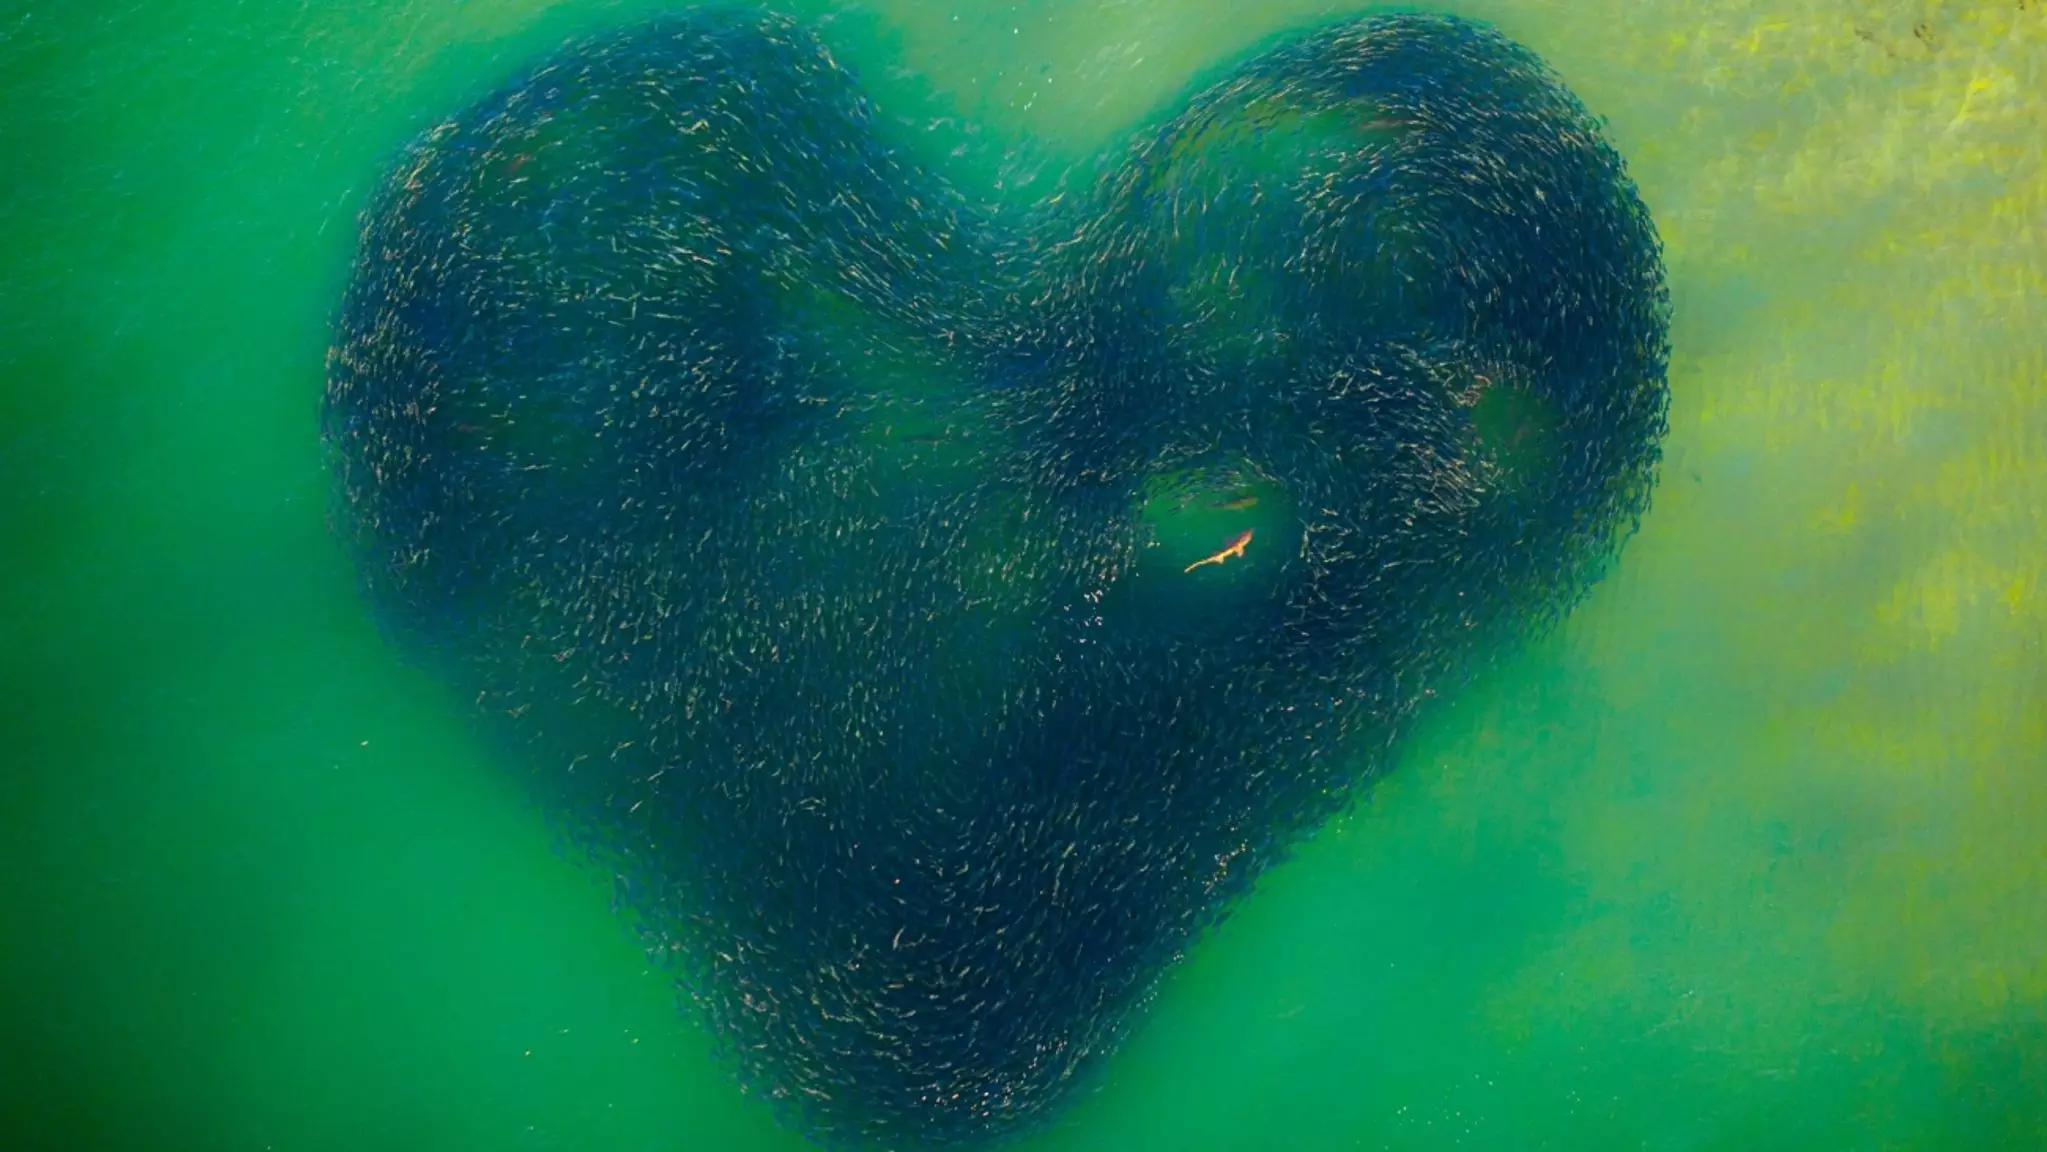 Incredible Photo Of Shark In Heart-Shaped School Of Fish Wins Photography Prize